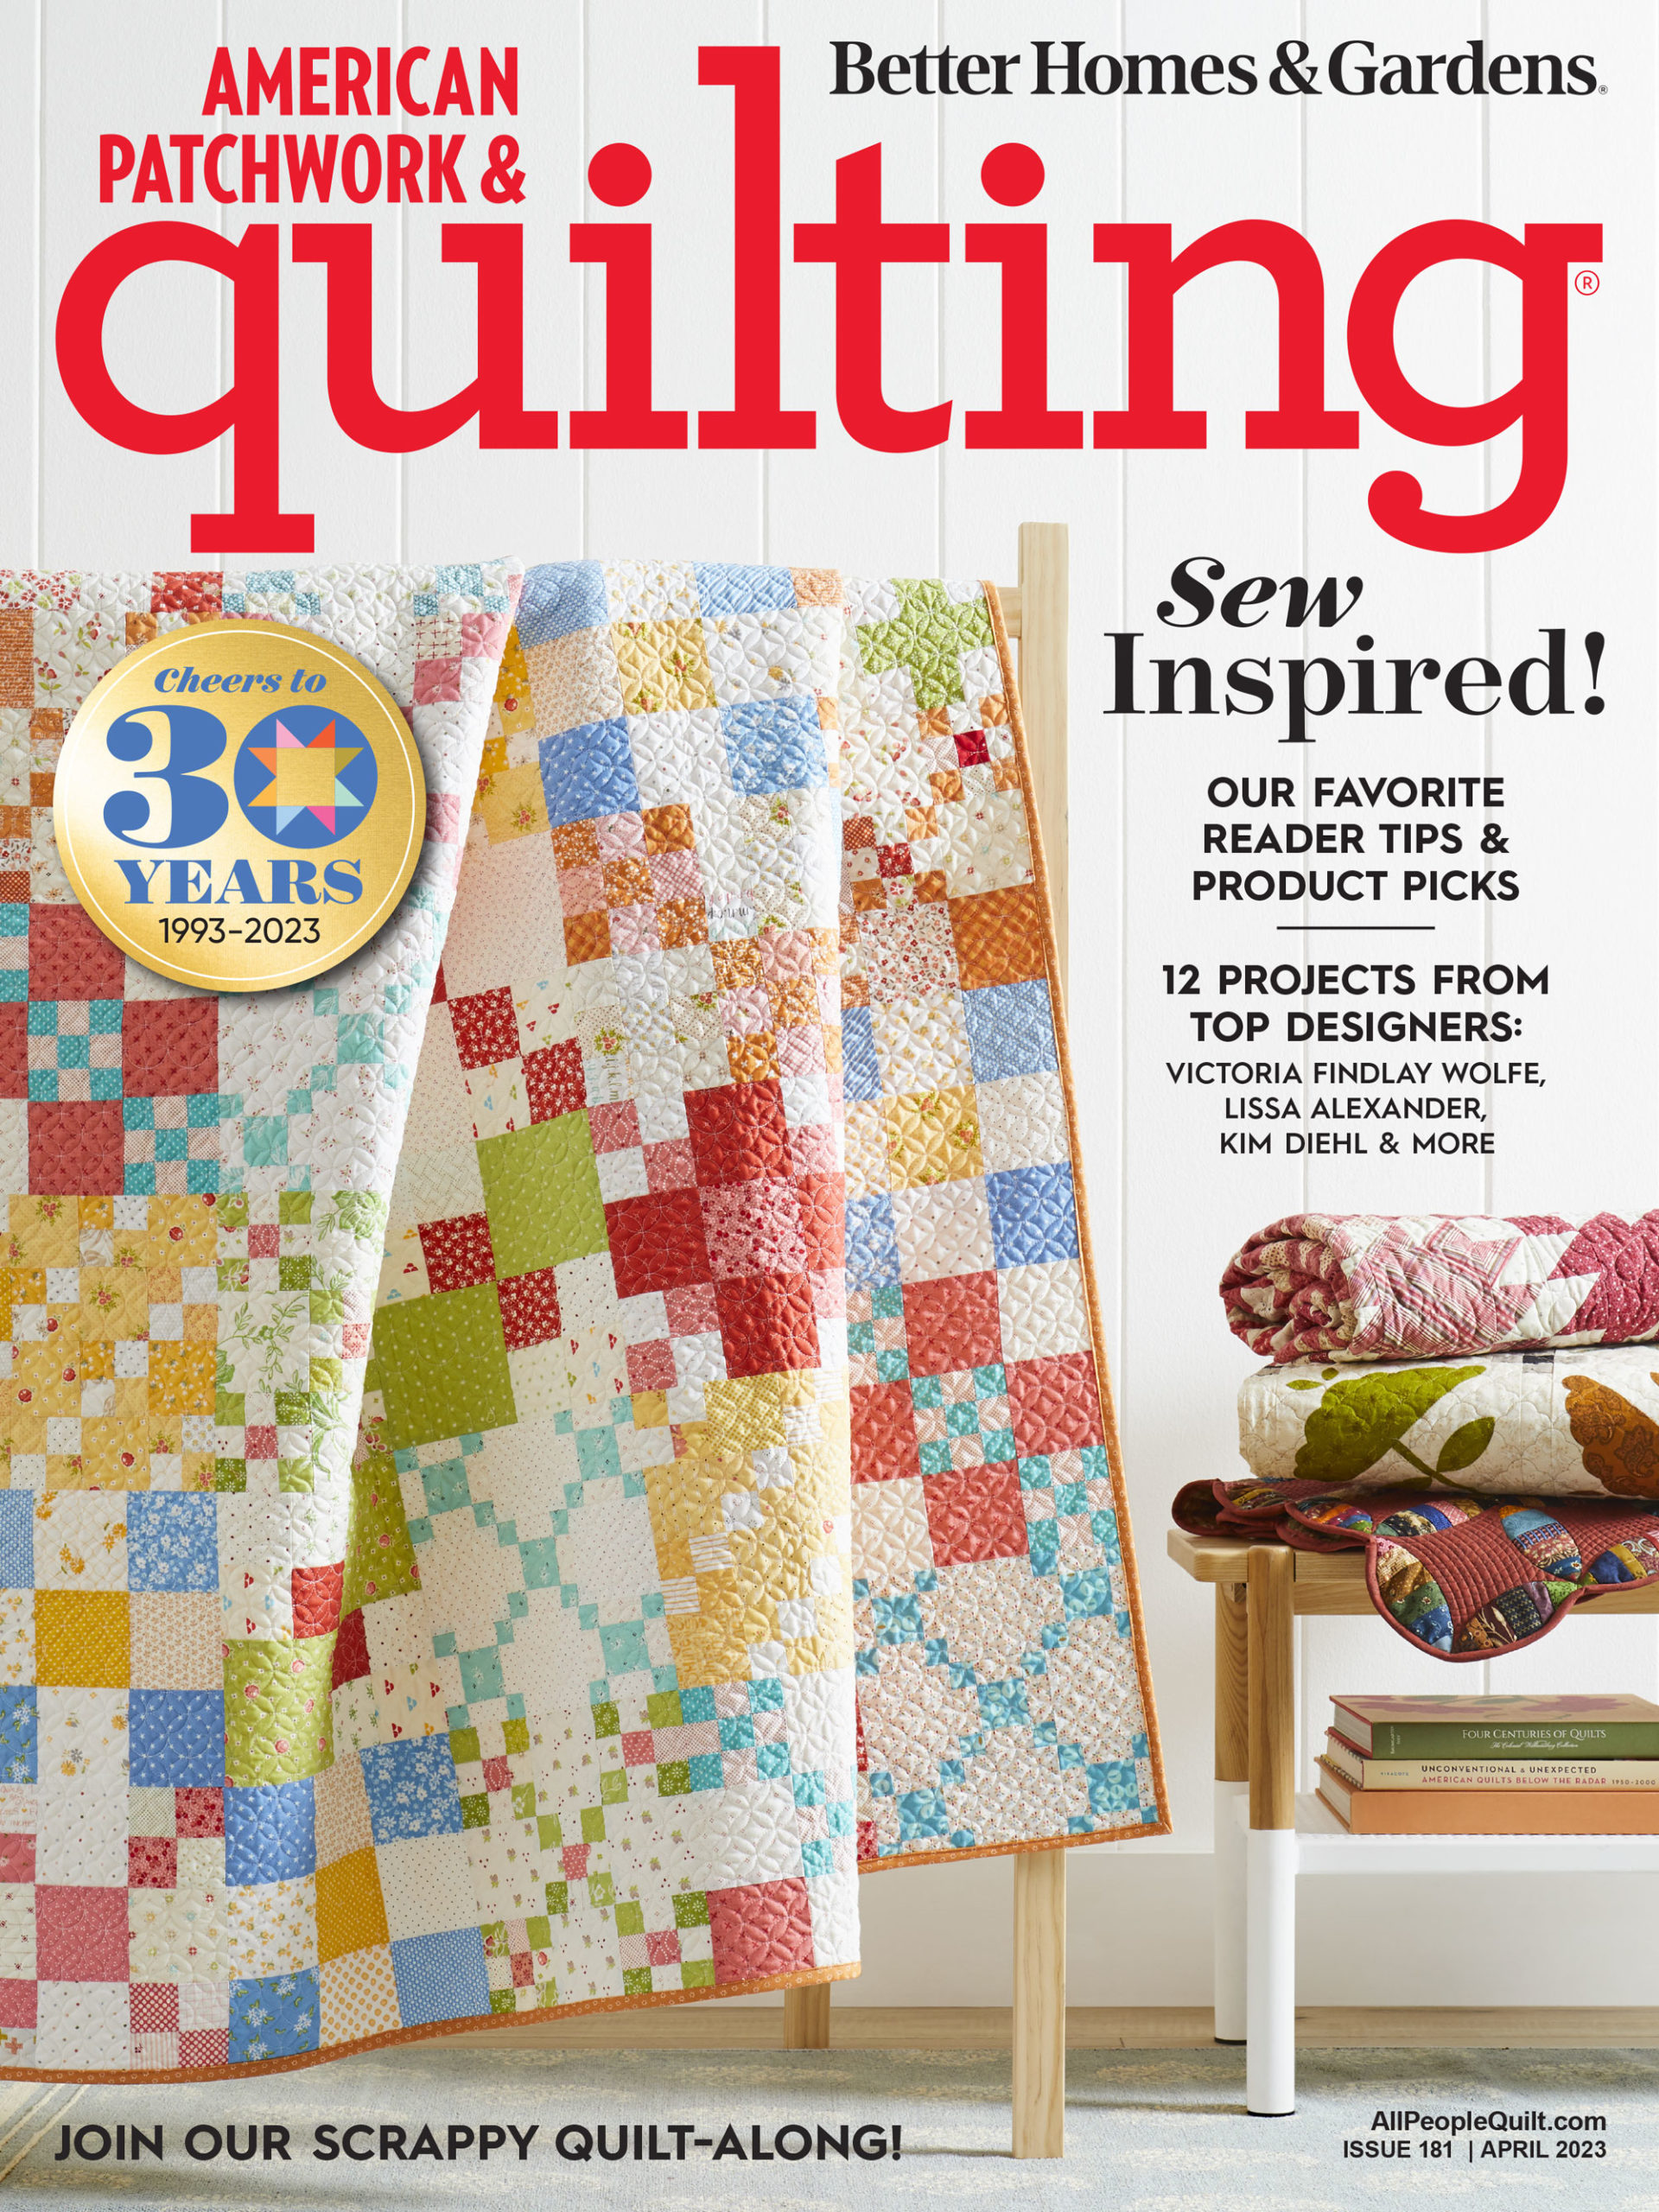 Celebrate with Quilts [Book]